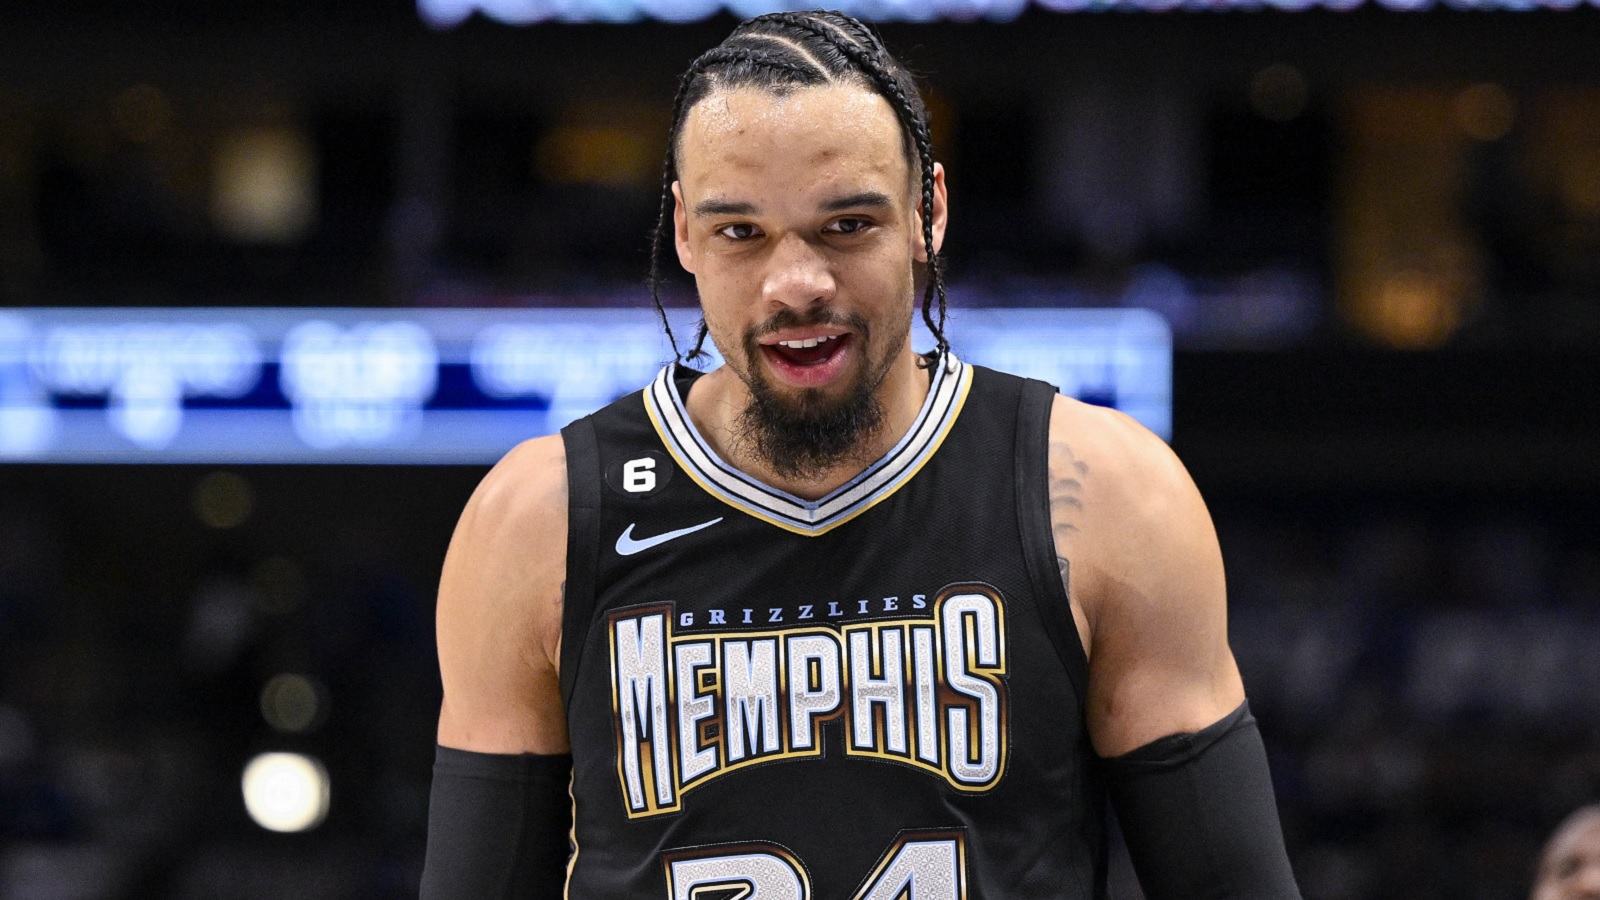 Dillon Brooks goes viral for unusual expression in Grizzlies' team photo